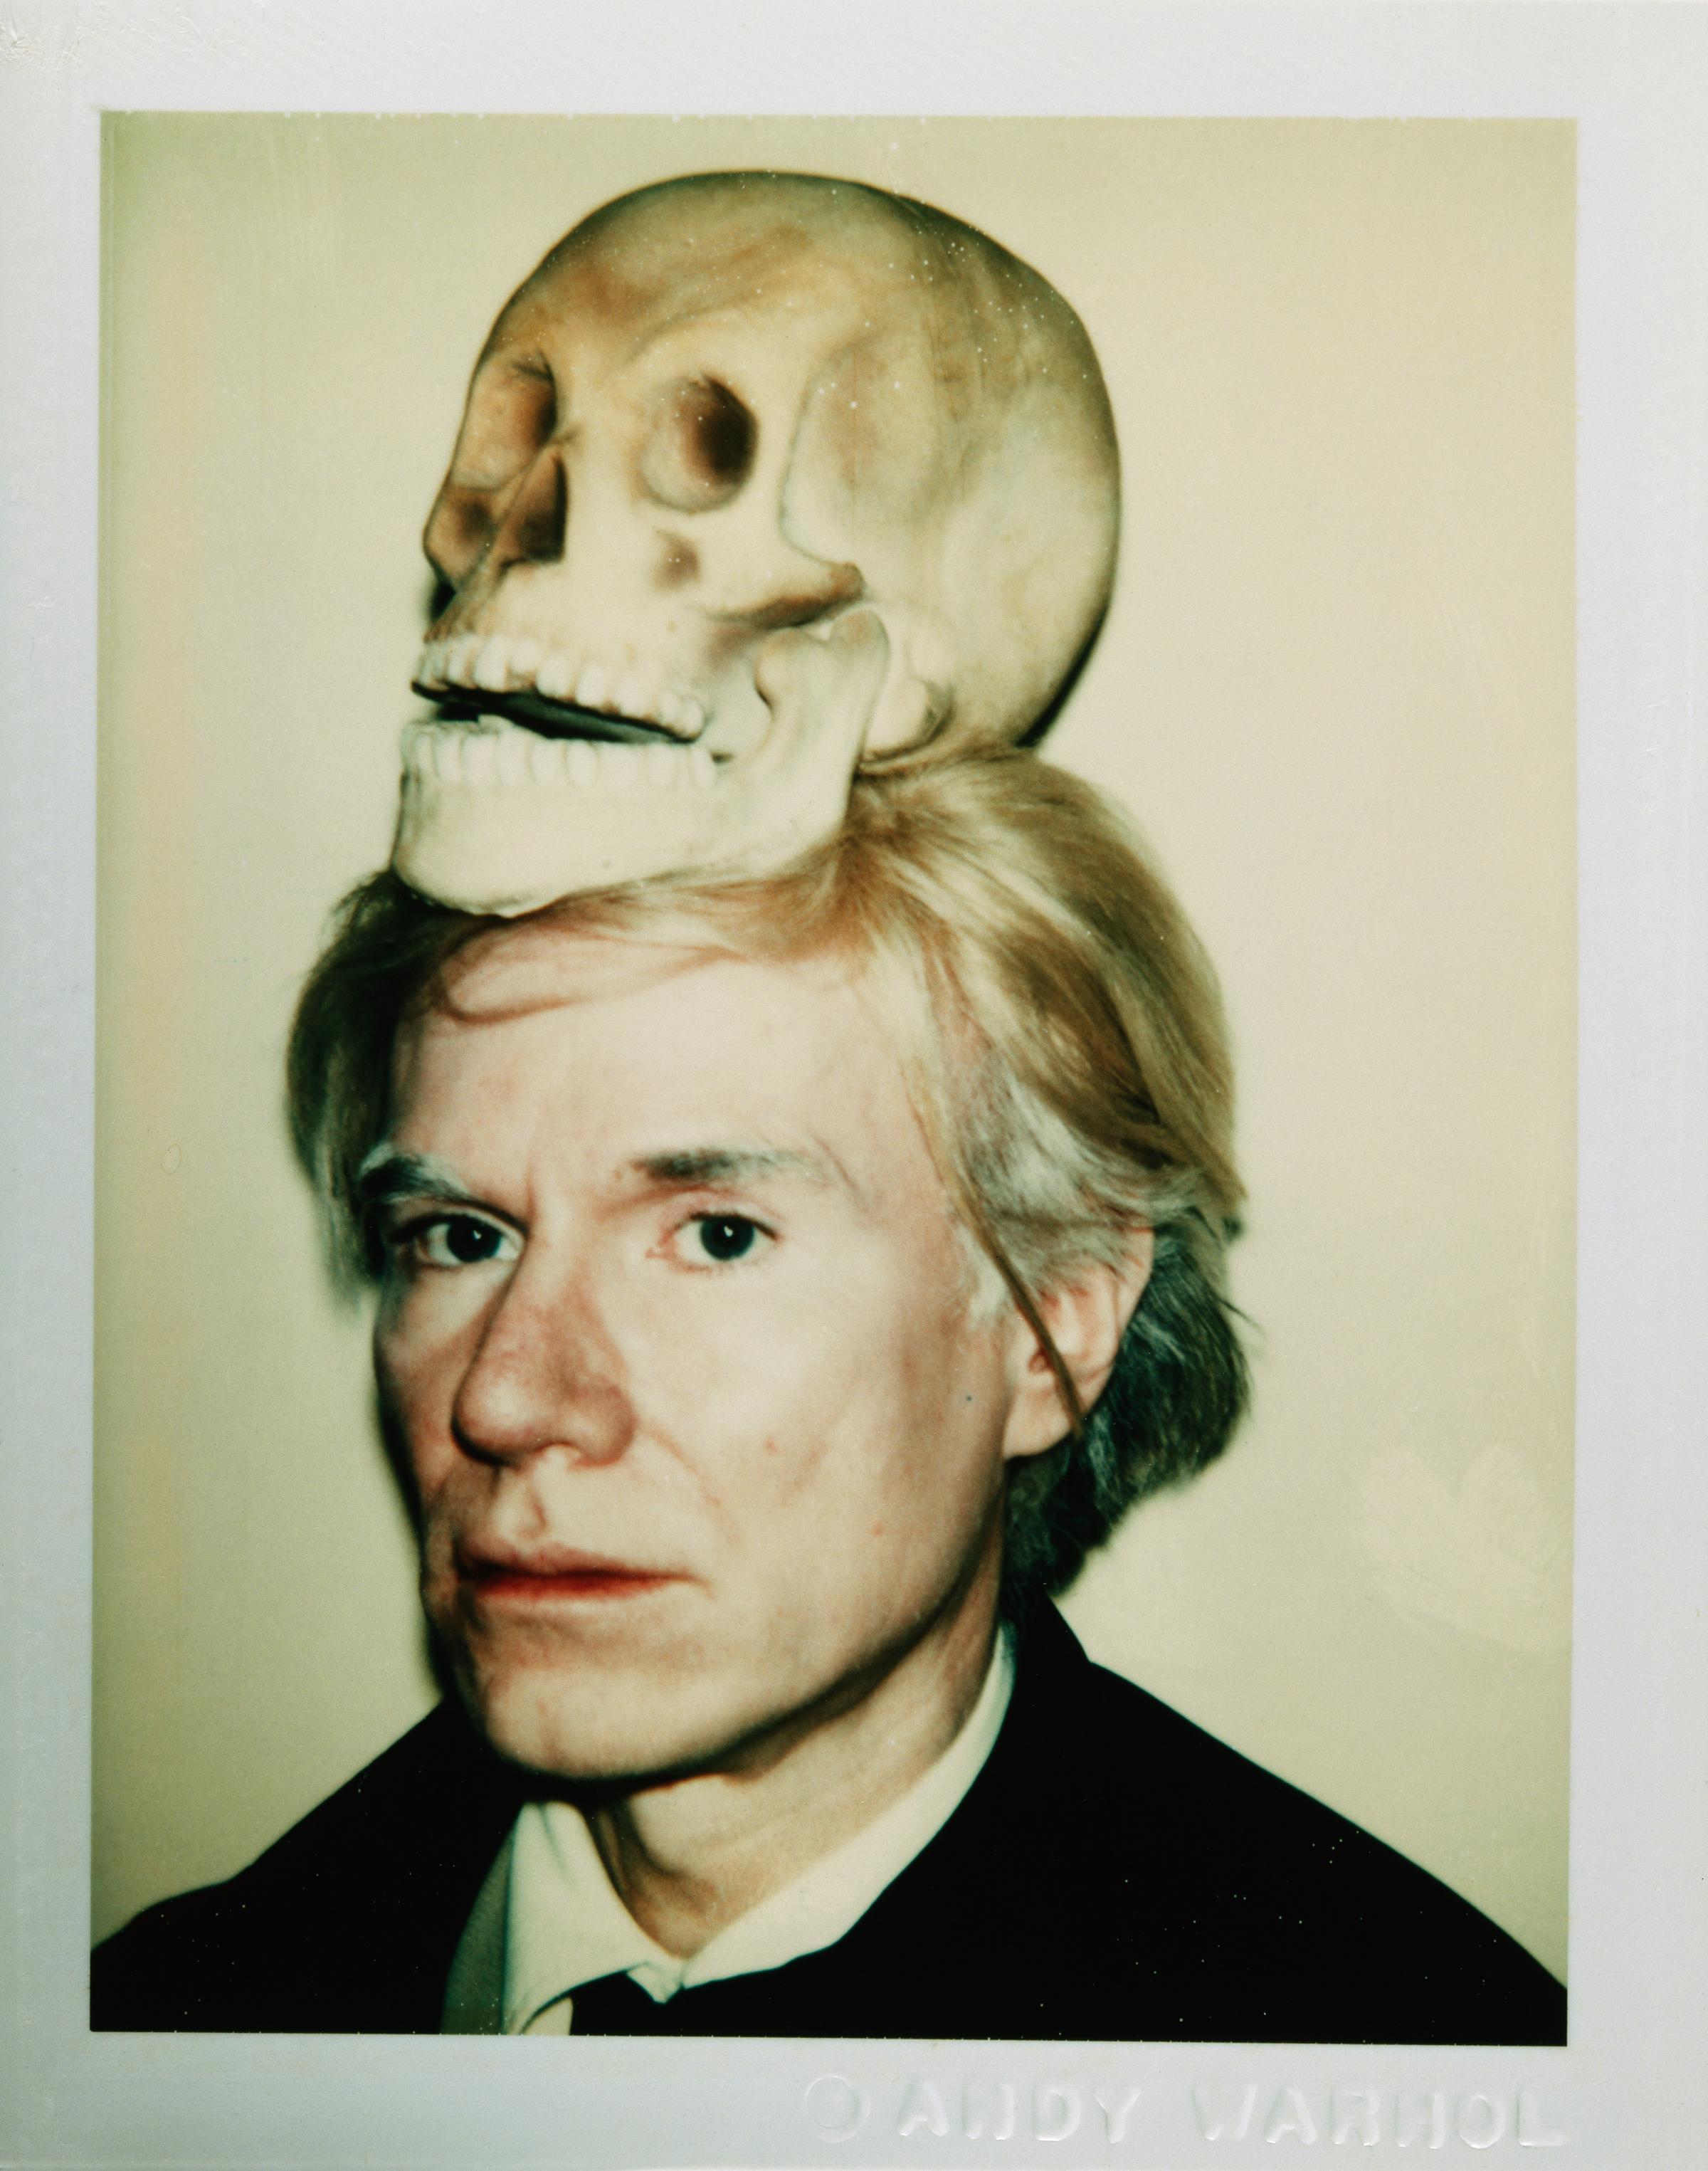 by Andy Warhol